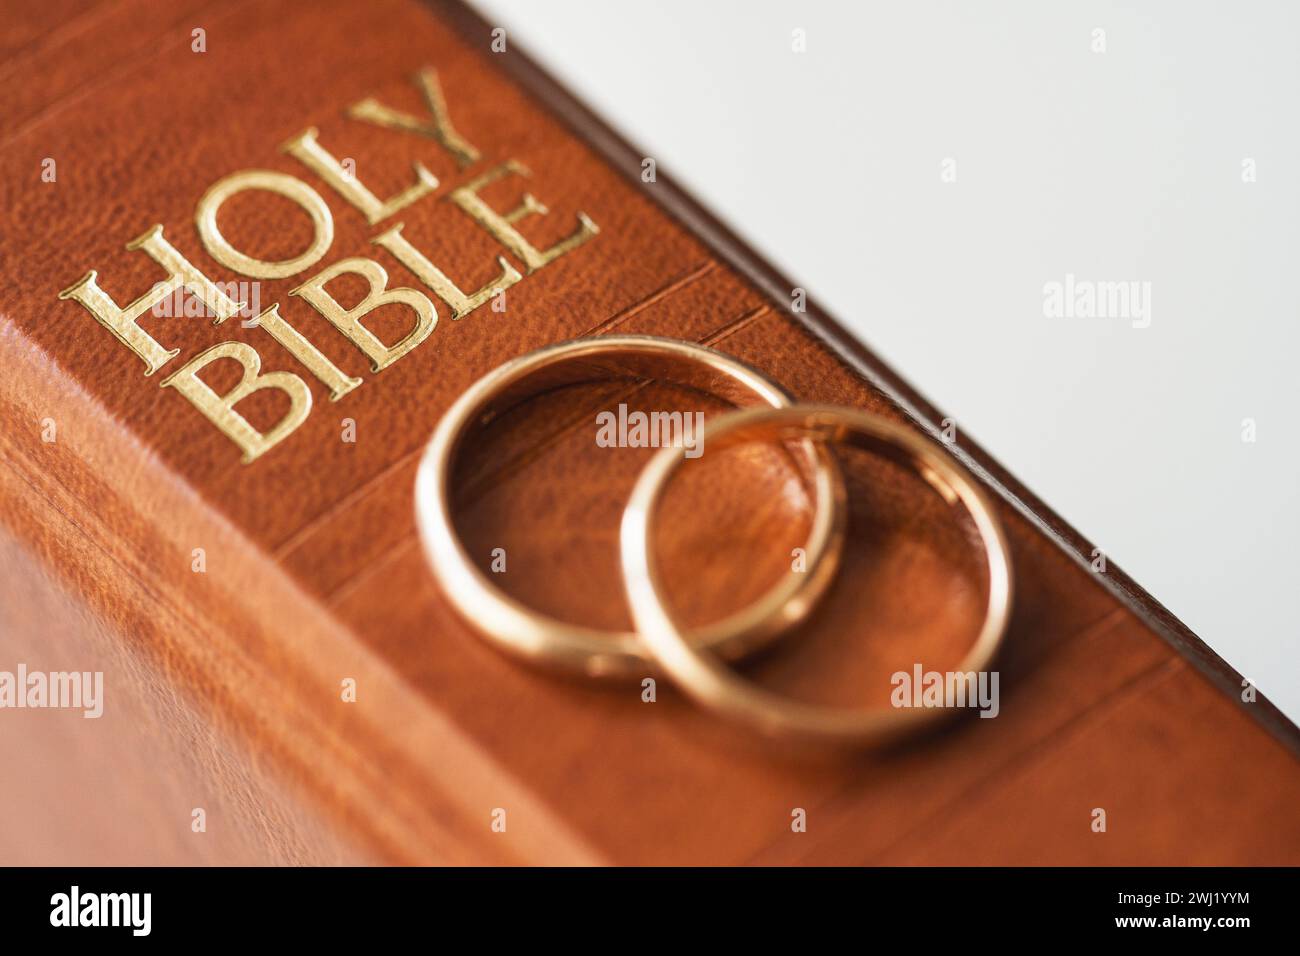 Two golden wedding rings and a holy bible represents the concept of marriage and the love between two Christians Stock Photo